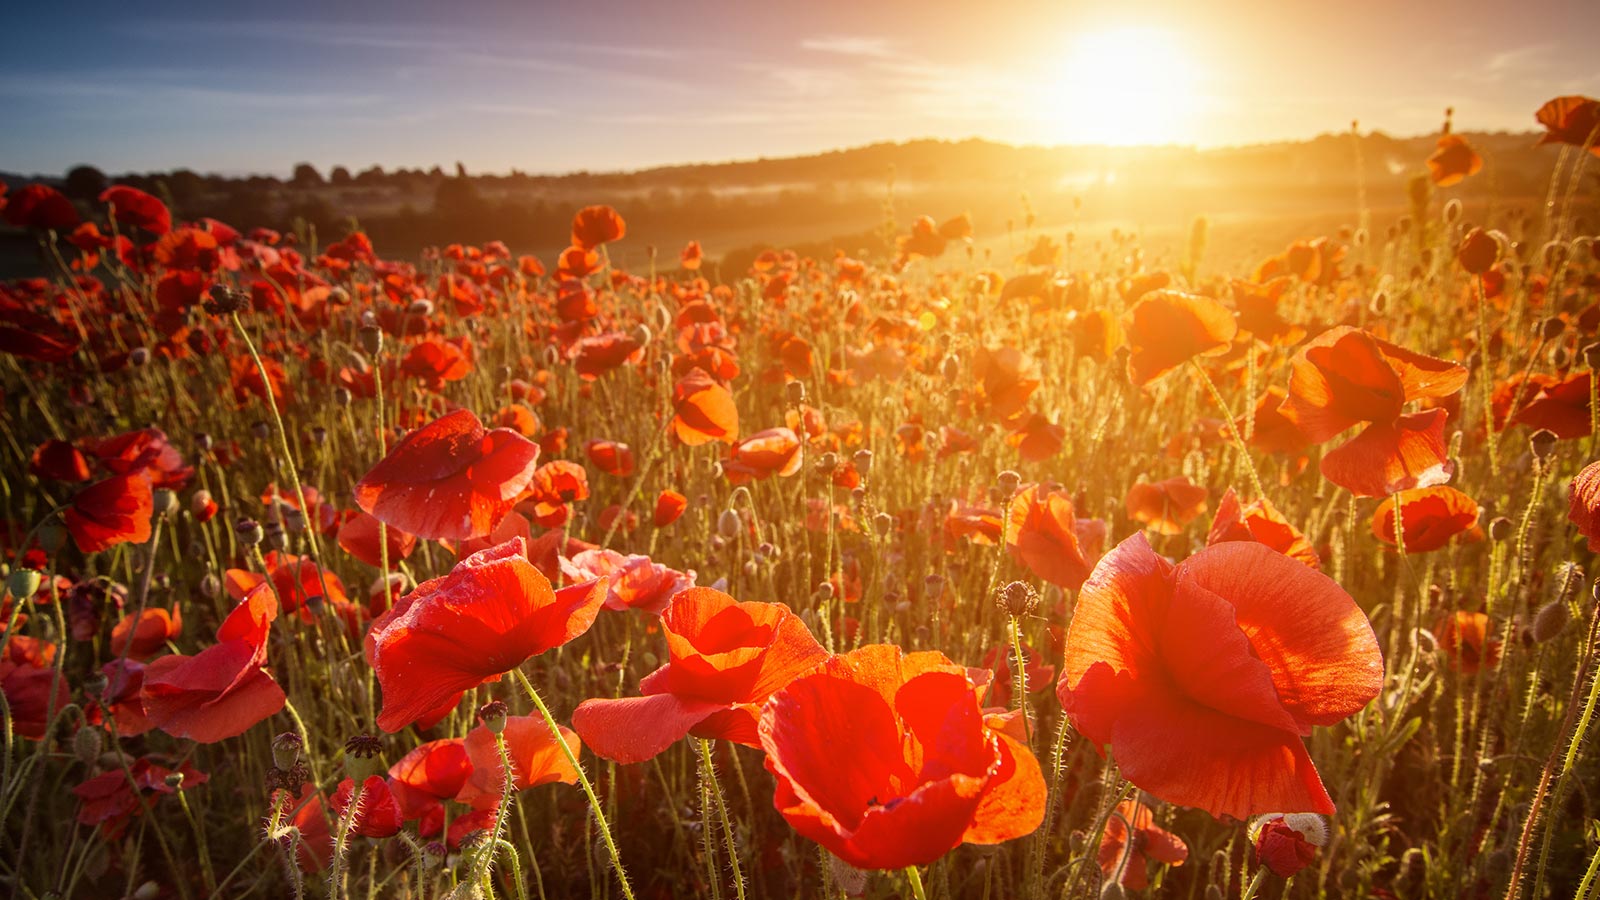 Poppies in a field with sunlight